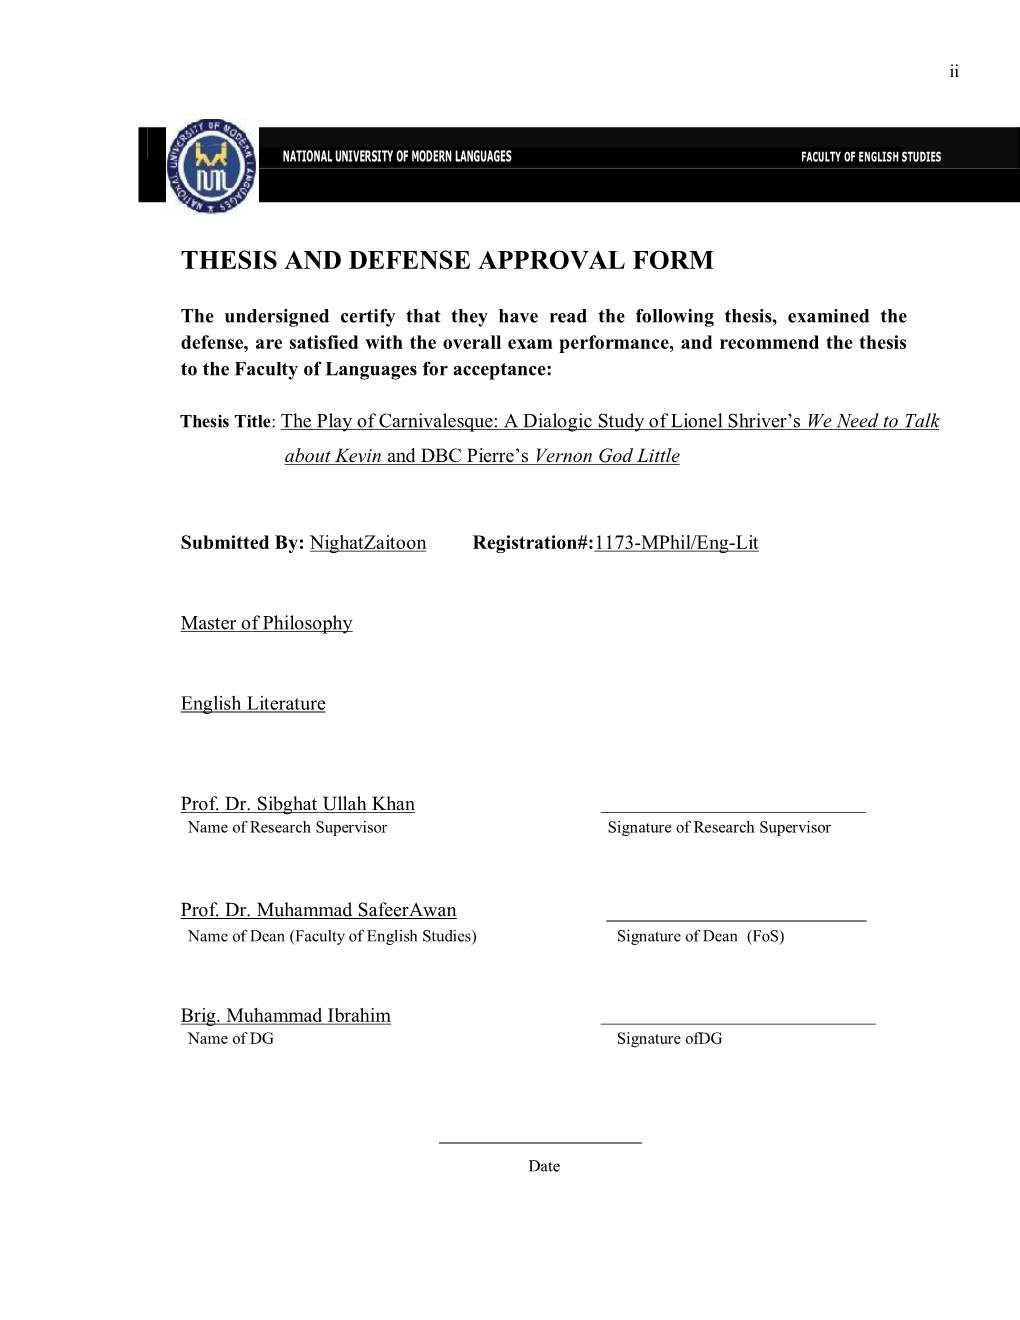 Thesis and Defense Approval Form